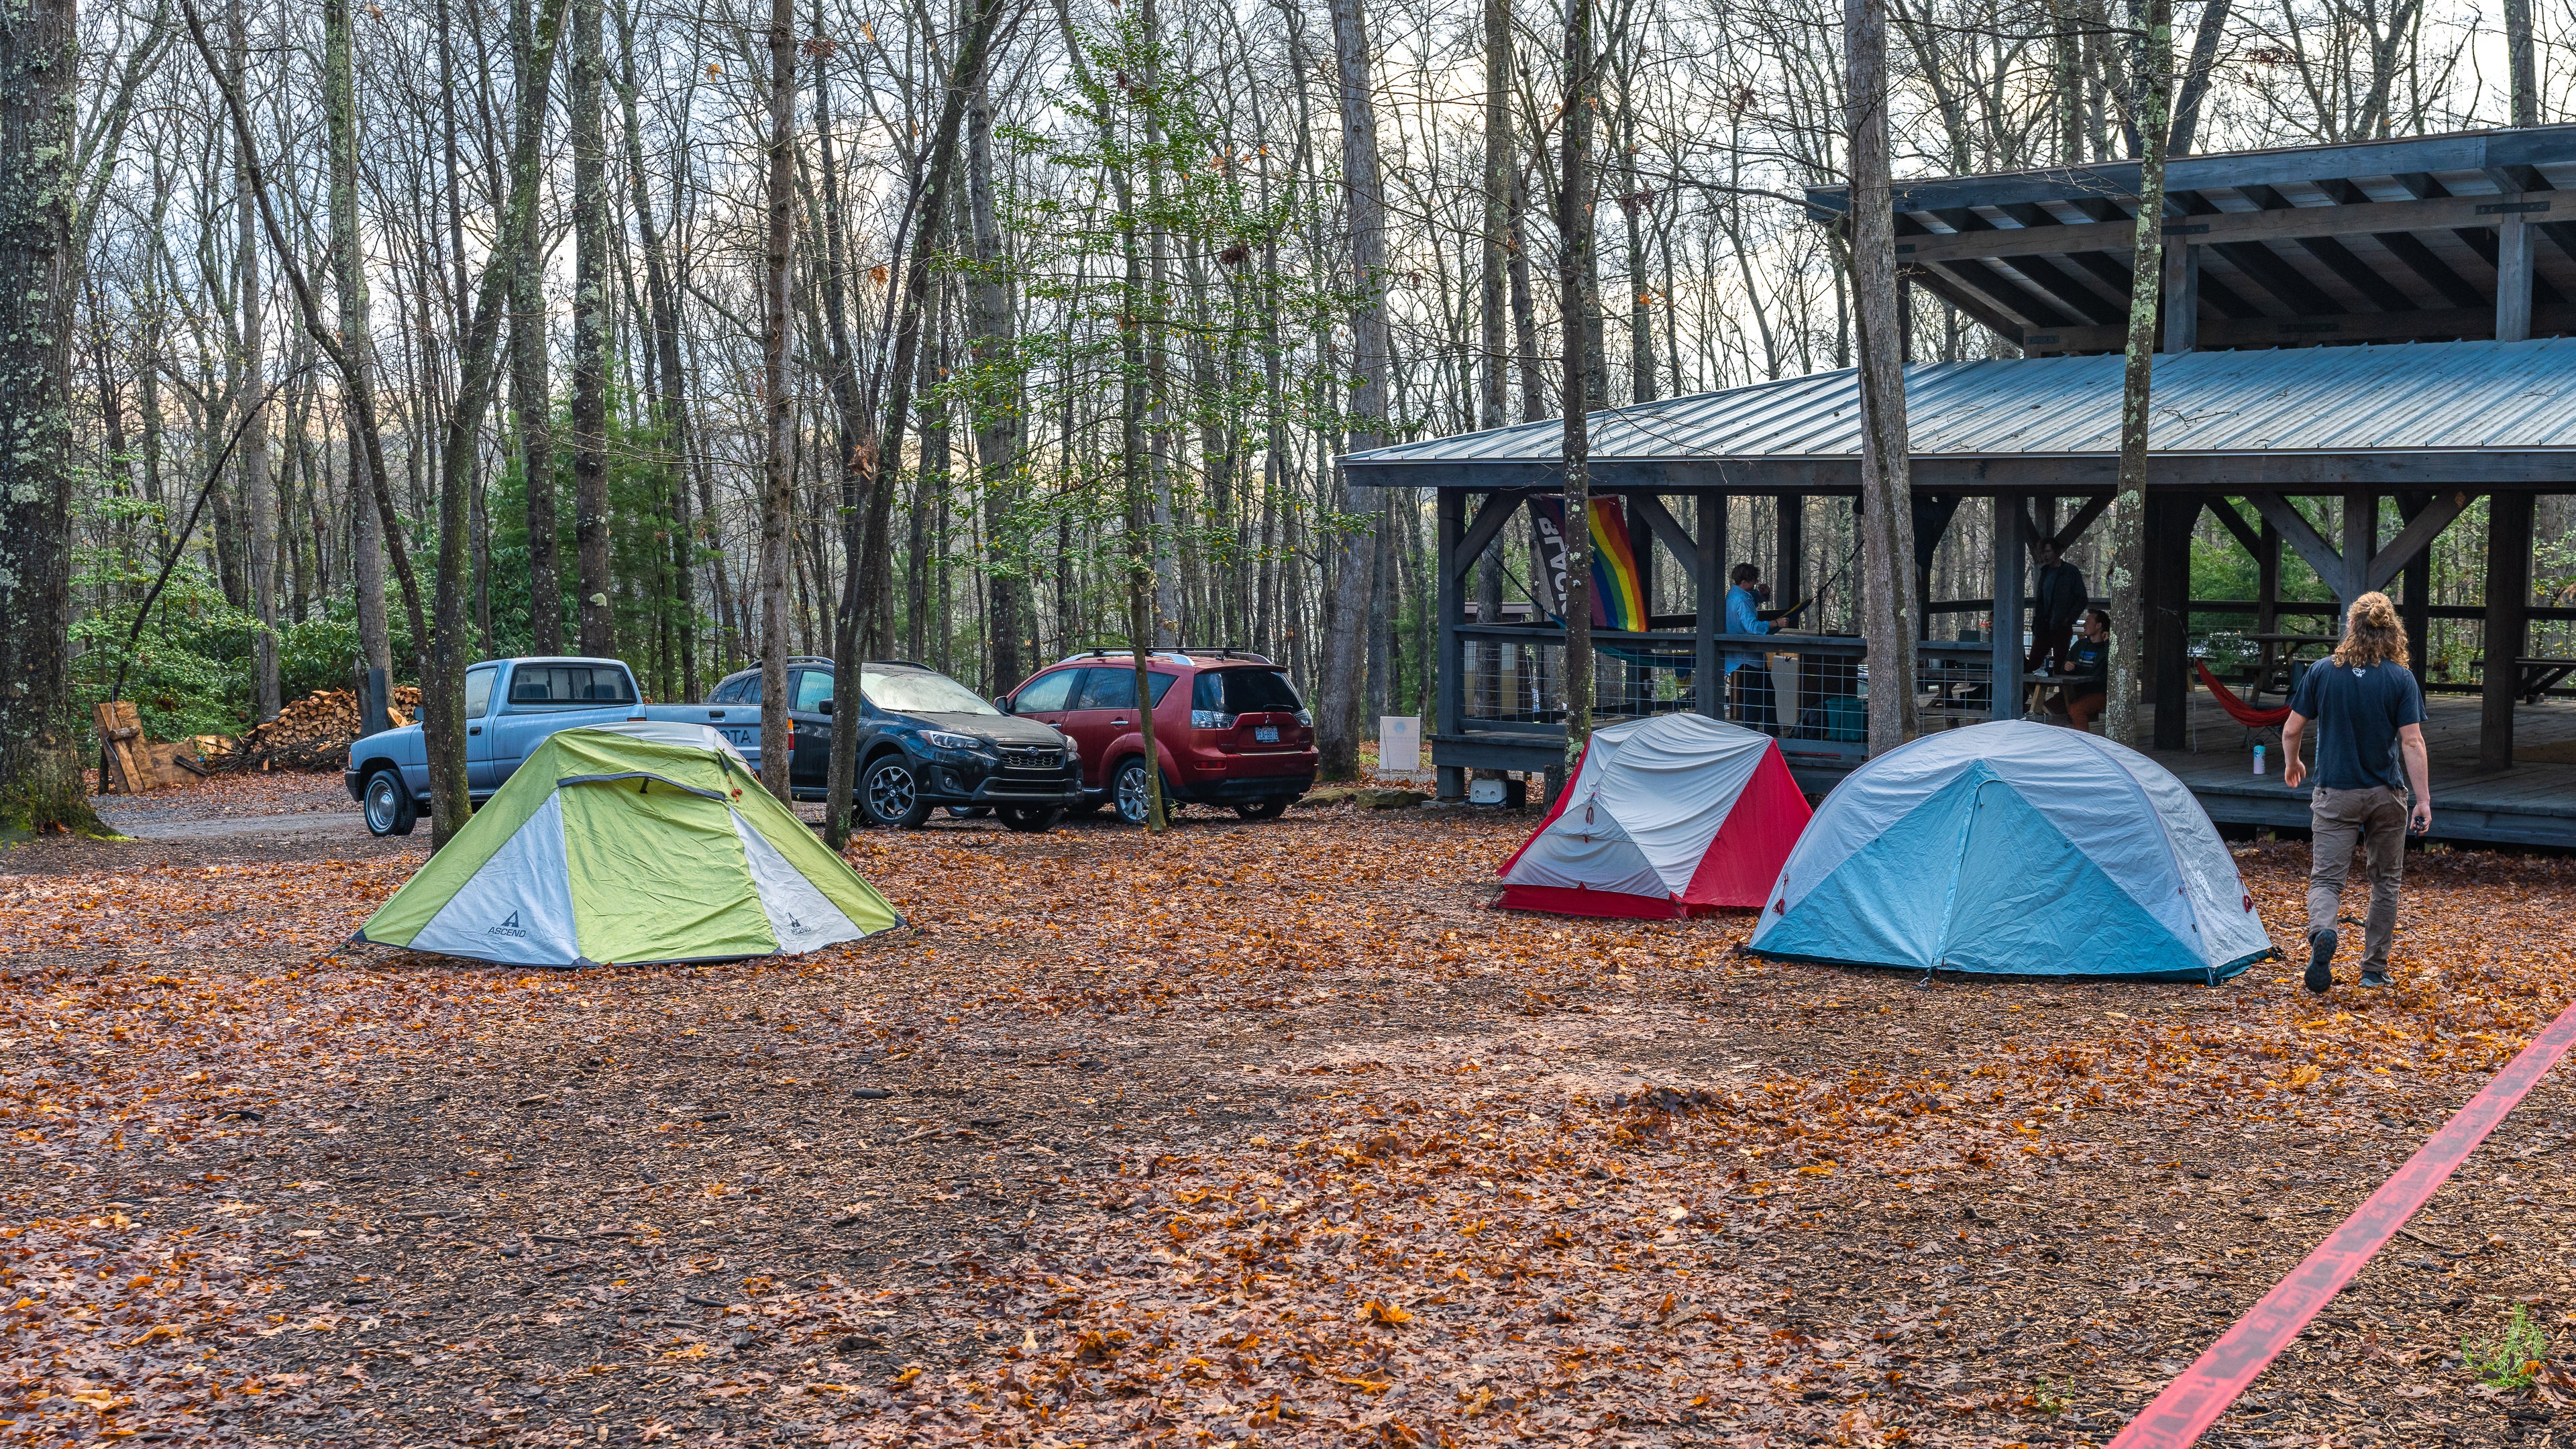 Camper submitted image from New River Gorge Campground - American Alpine Club - 1